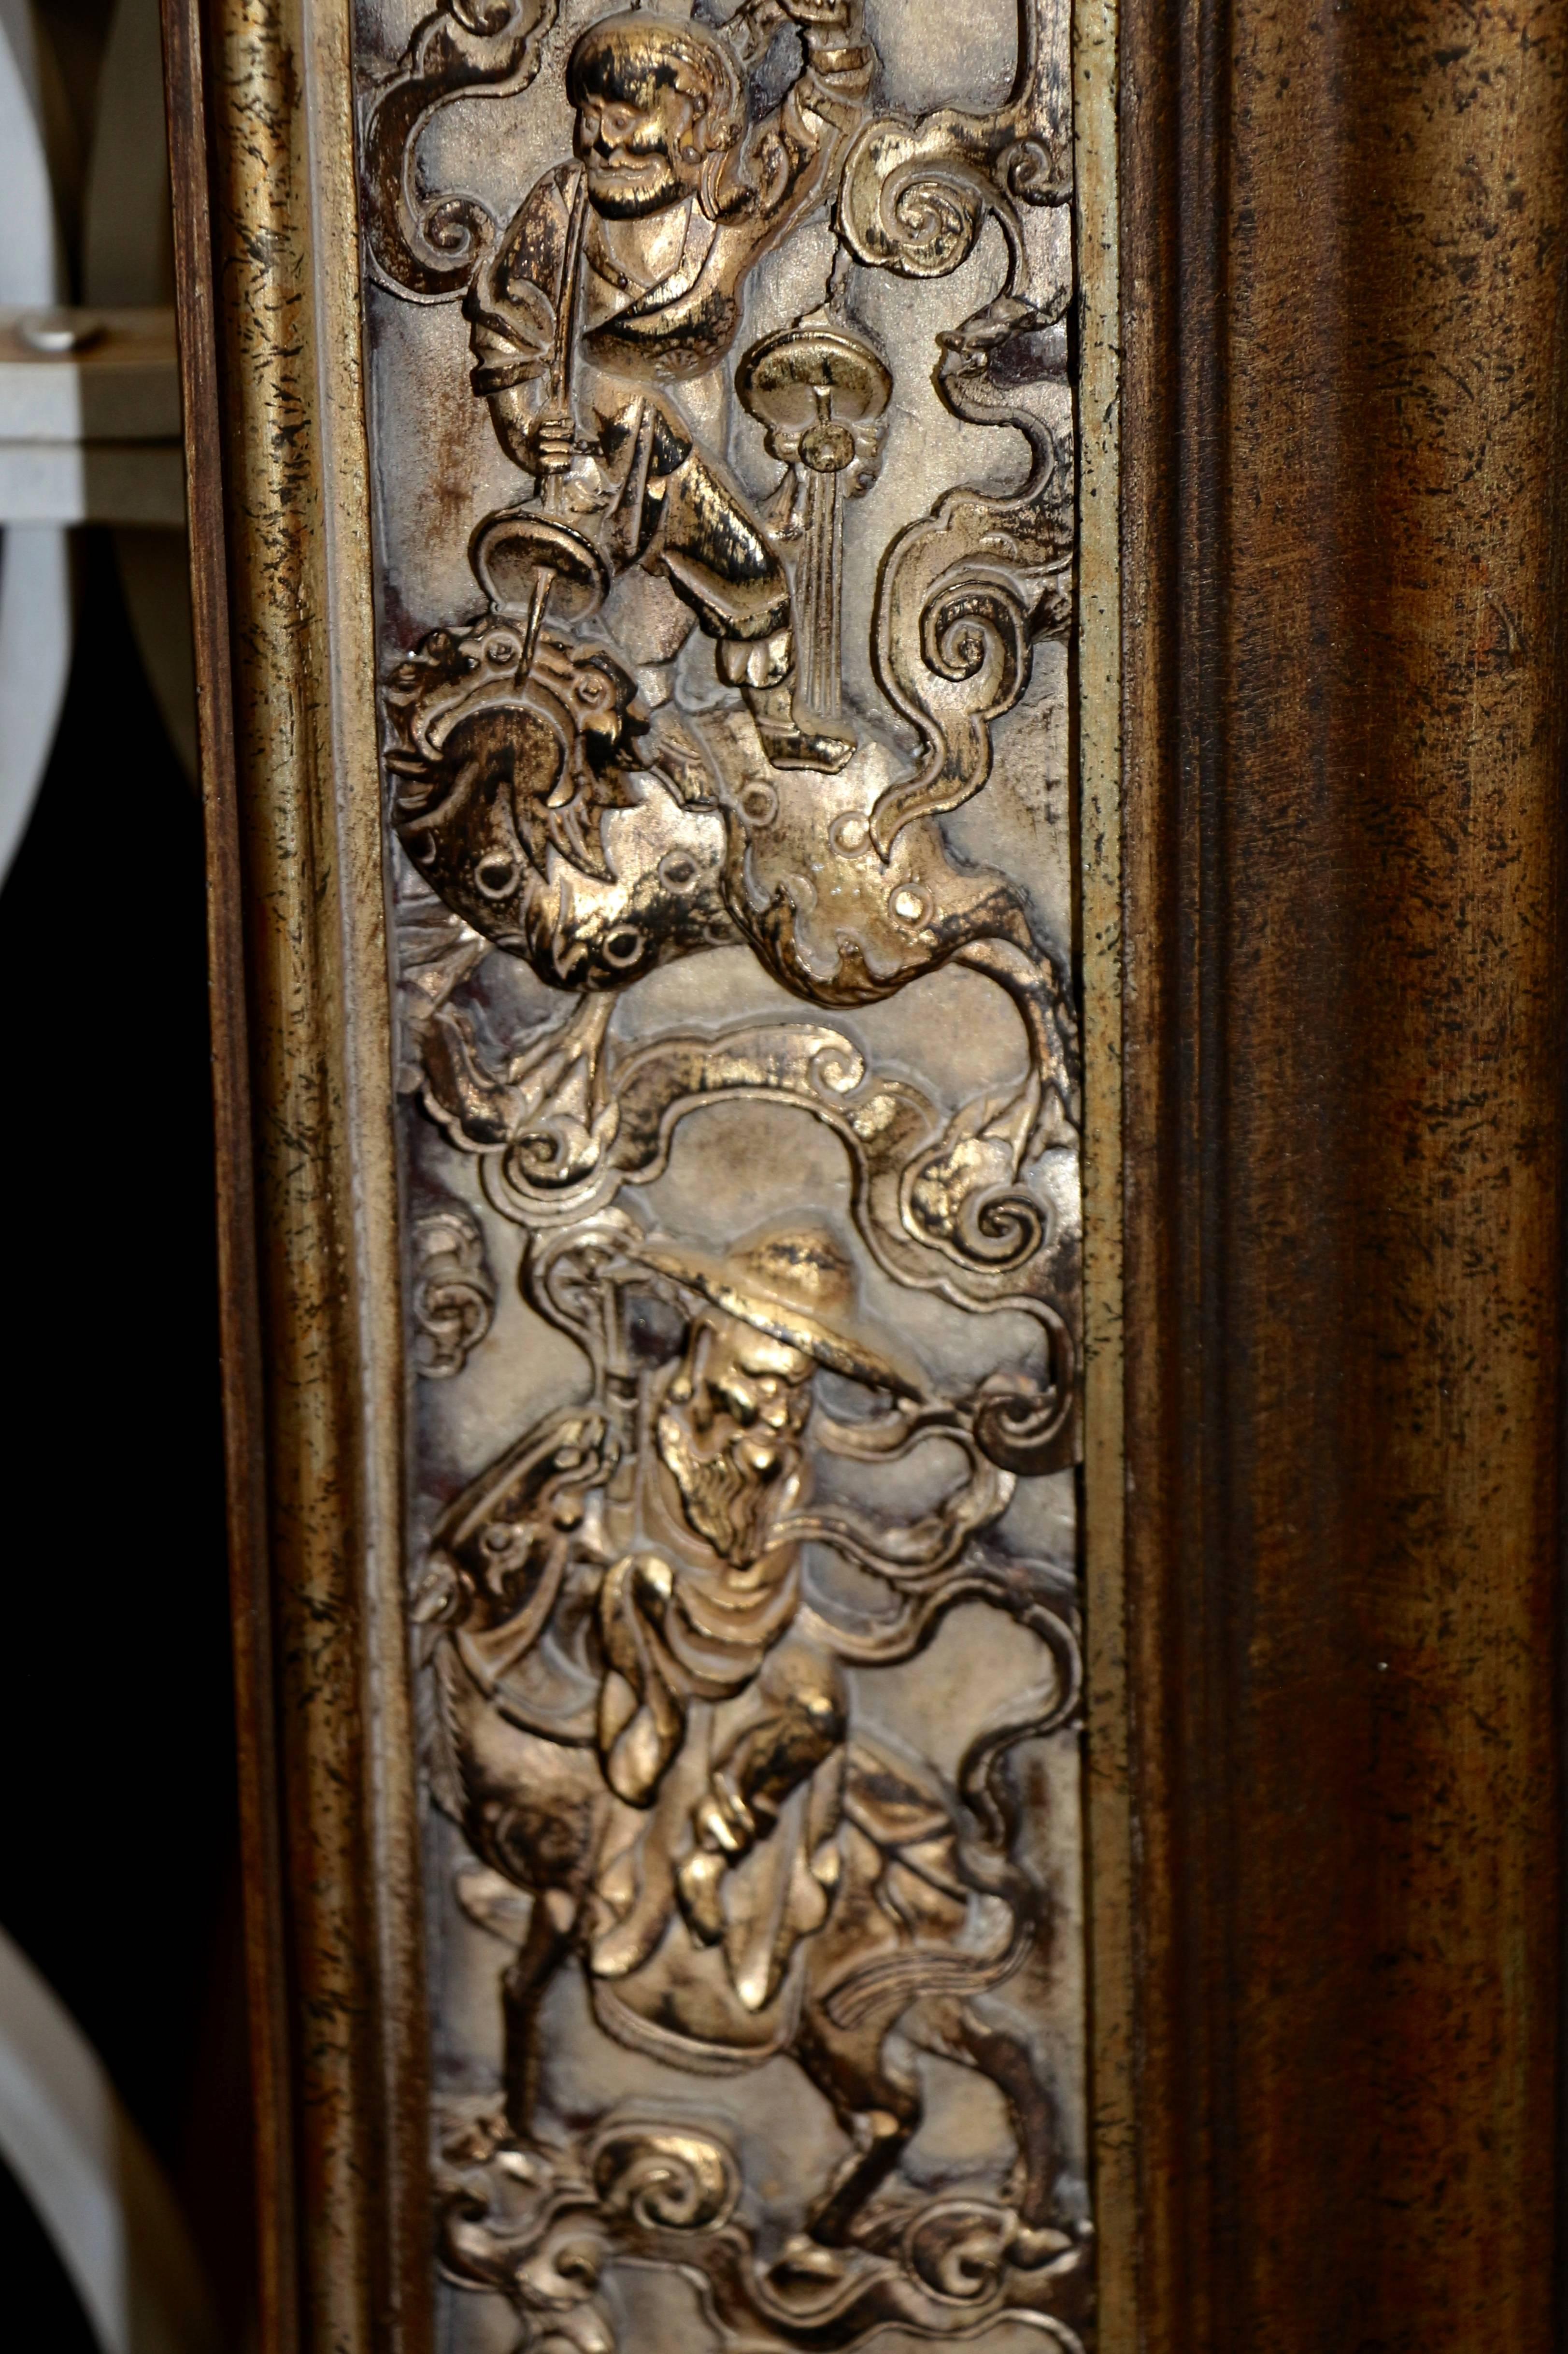 A really wonderful La Barge mirror with an Asian motif. I have seen a lot of La Barge mirrors although they are usually églomisé finished or in interesting bronze frame. This is the first one we have come across with a craved wood motif with such